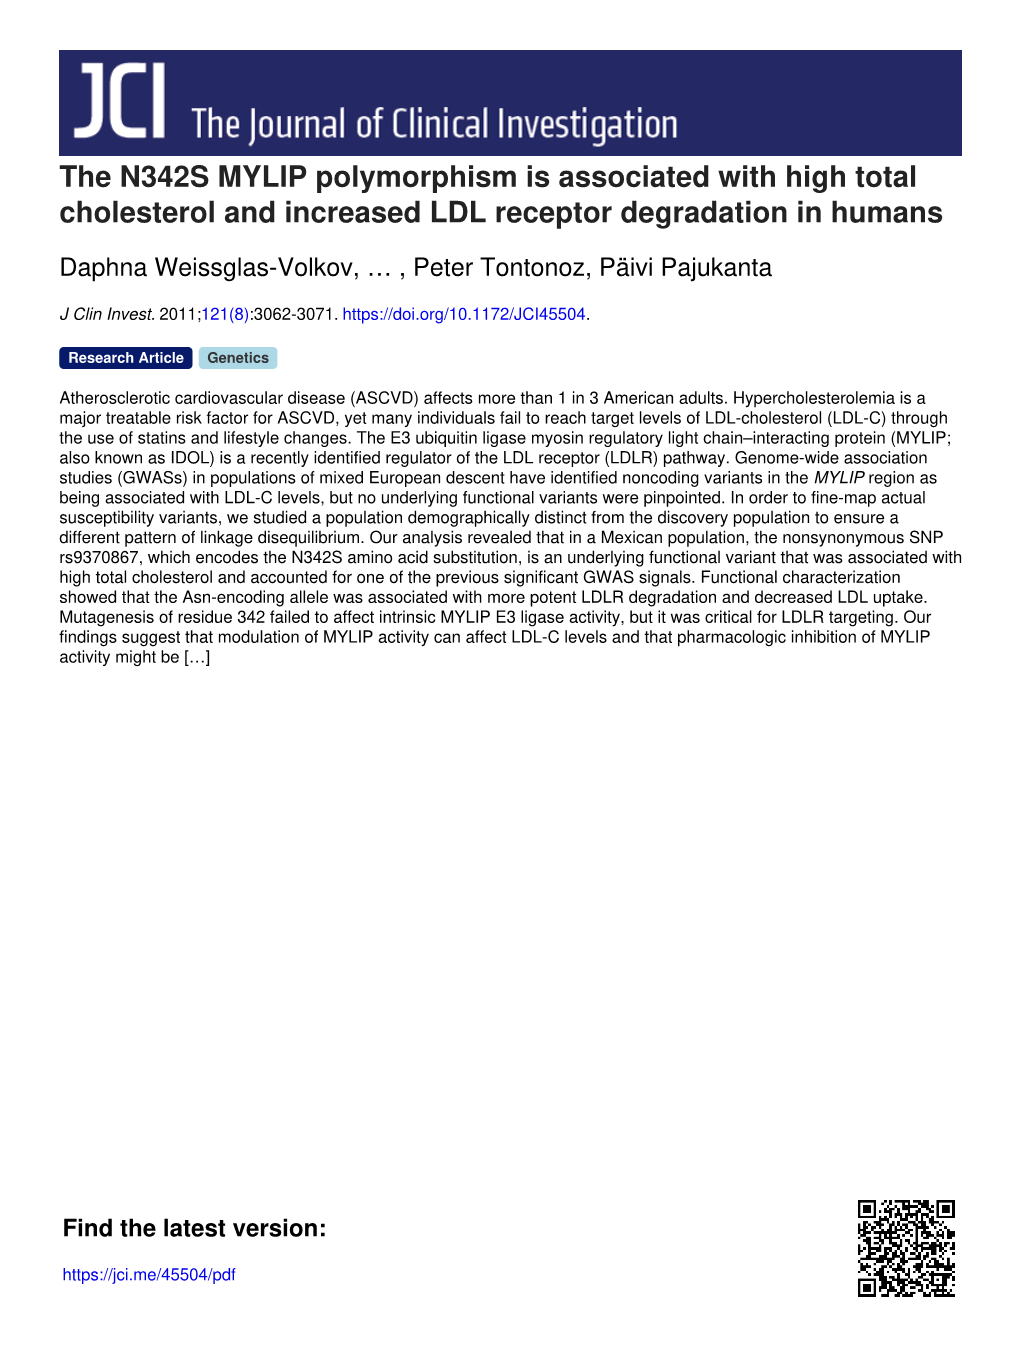 The N342S MYLIP Polymorphism Is Associated with High Total Cholesterol and Increased LDL Receptor Degradation in Humans